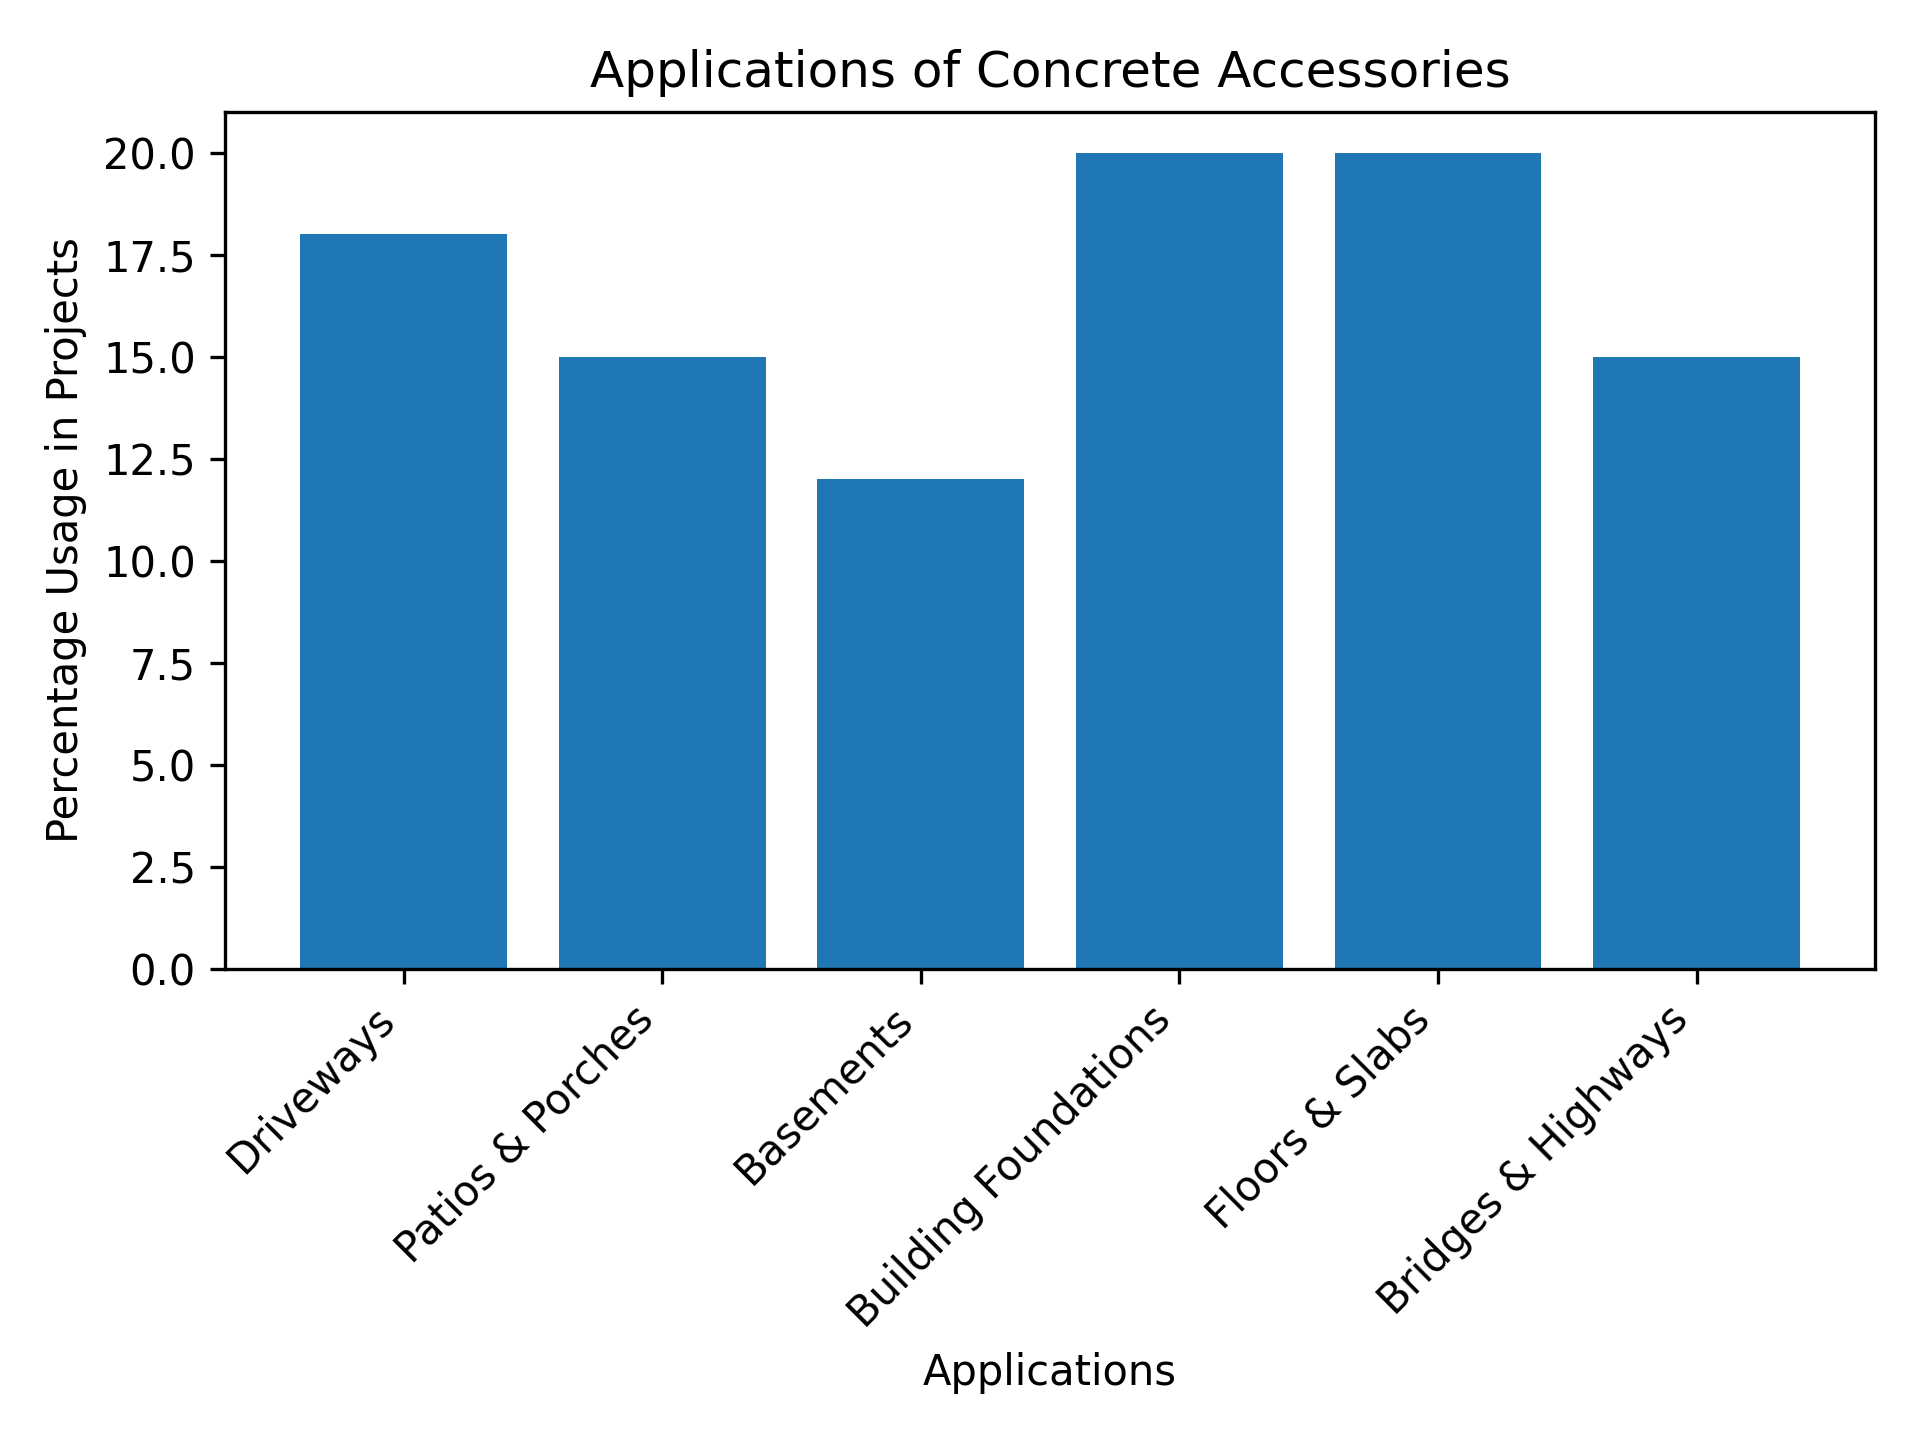 This visualization showcases the applications of concrete accessories in different areas, such as driveways, patios, and commercial buildings.